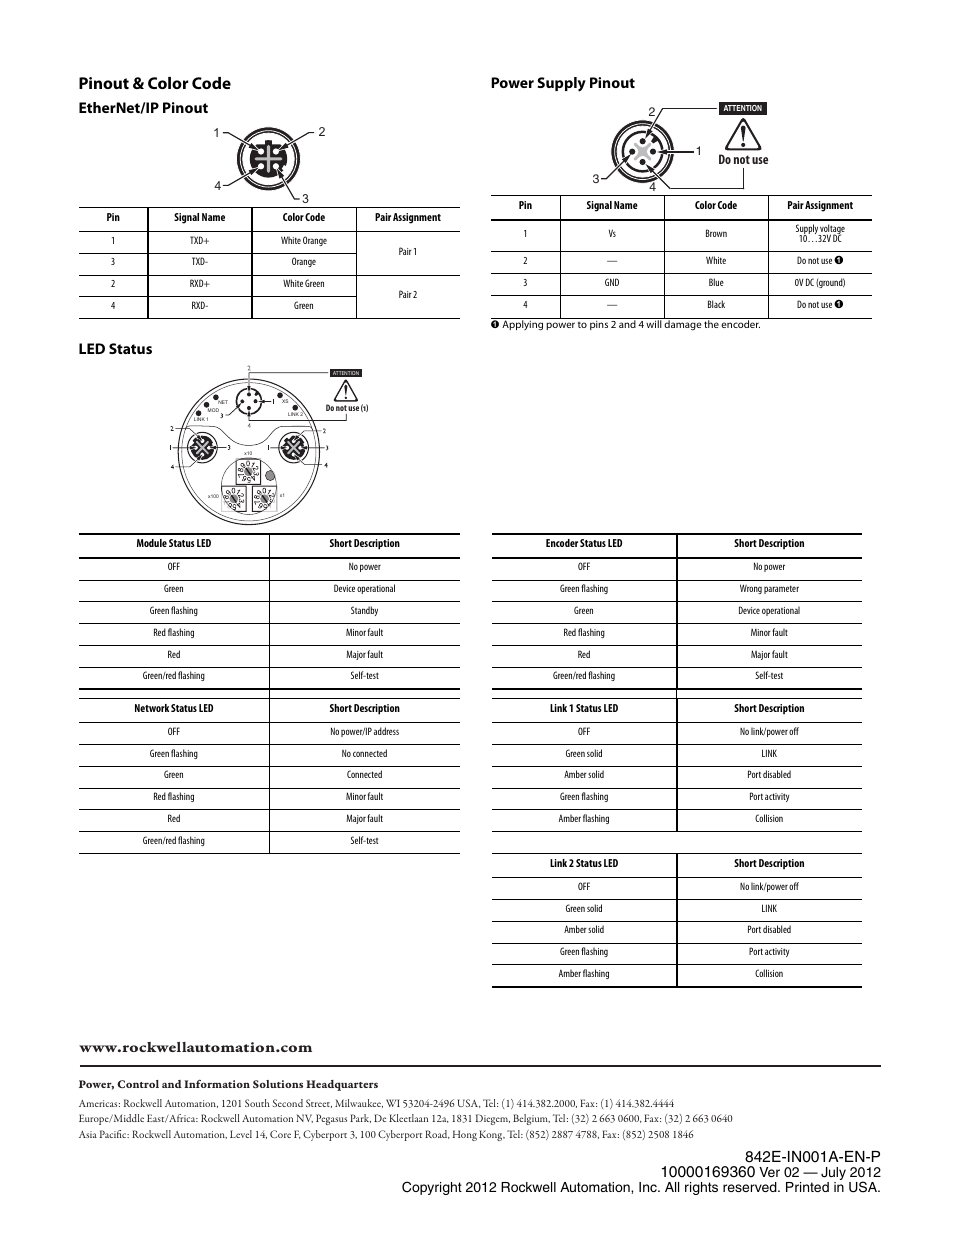 Pinout & color code, Ethernet/ip pinout led status | Rockwell Automation 842E EtherNet/IP Multi-Turn Encoders User Manual | Page 4 / 4